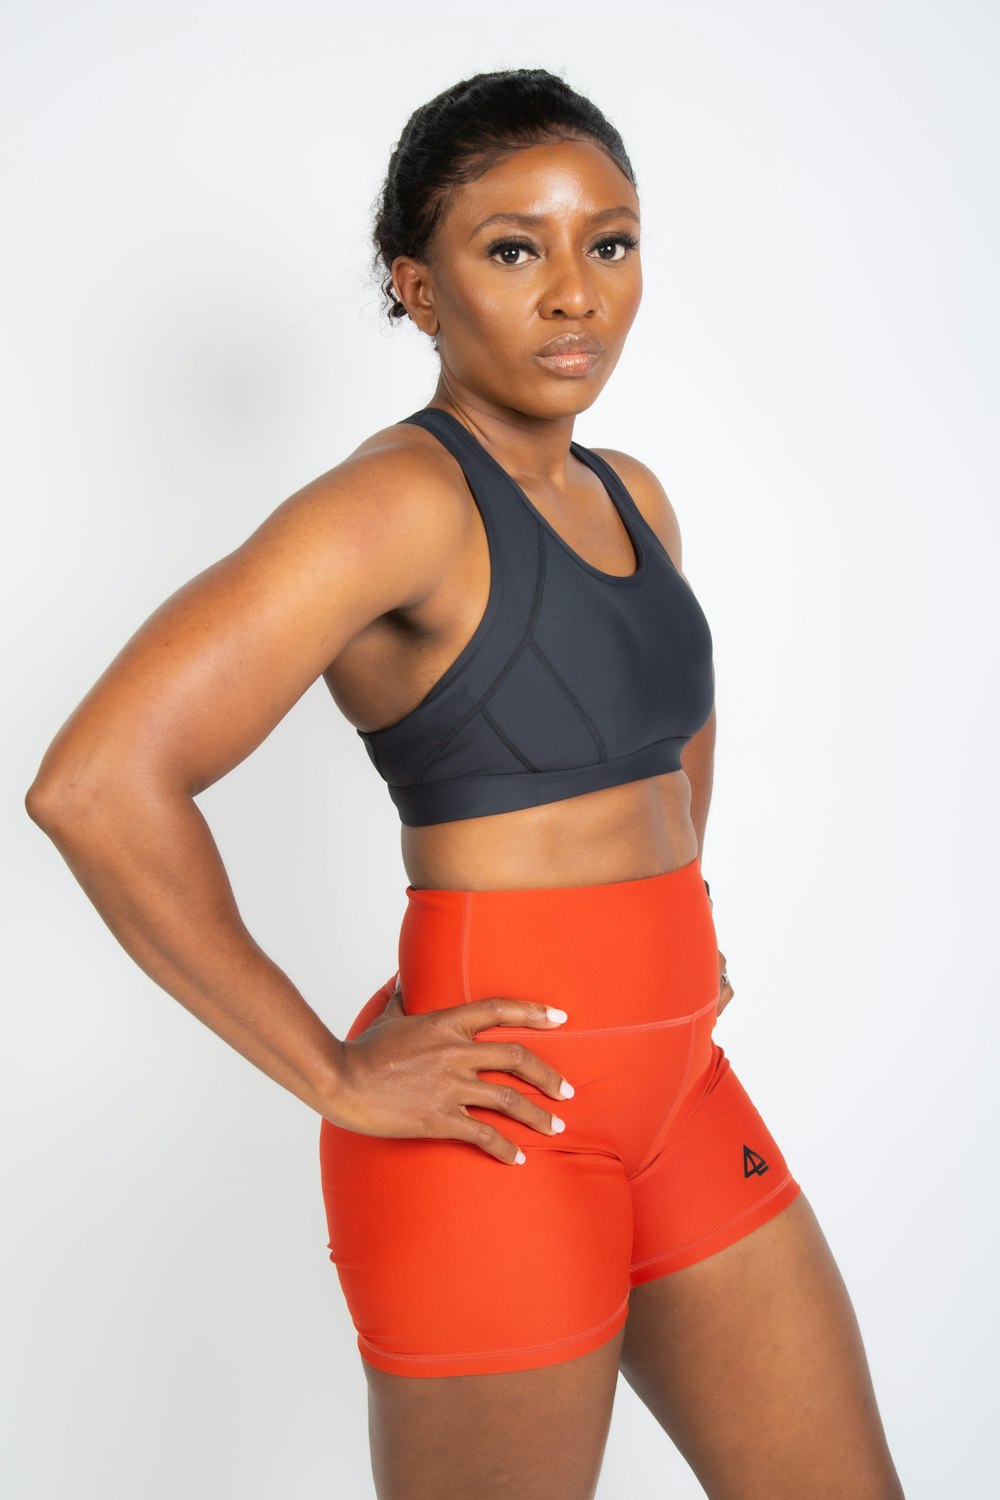 A woman in a sports bra top and panties photo – Free Wellness Image on  Unsplash